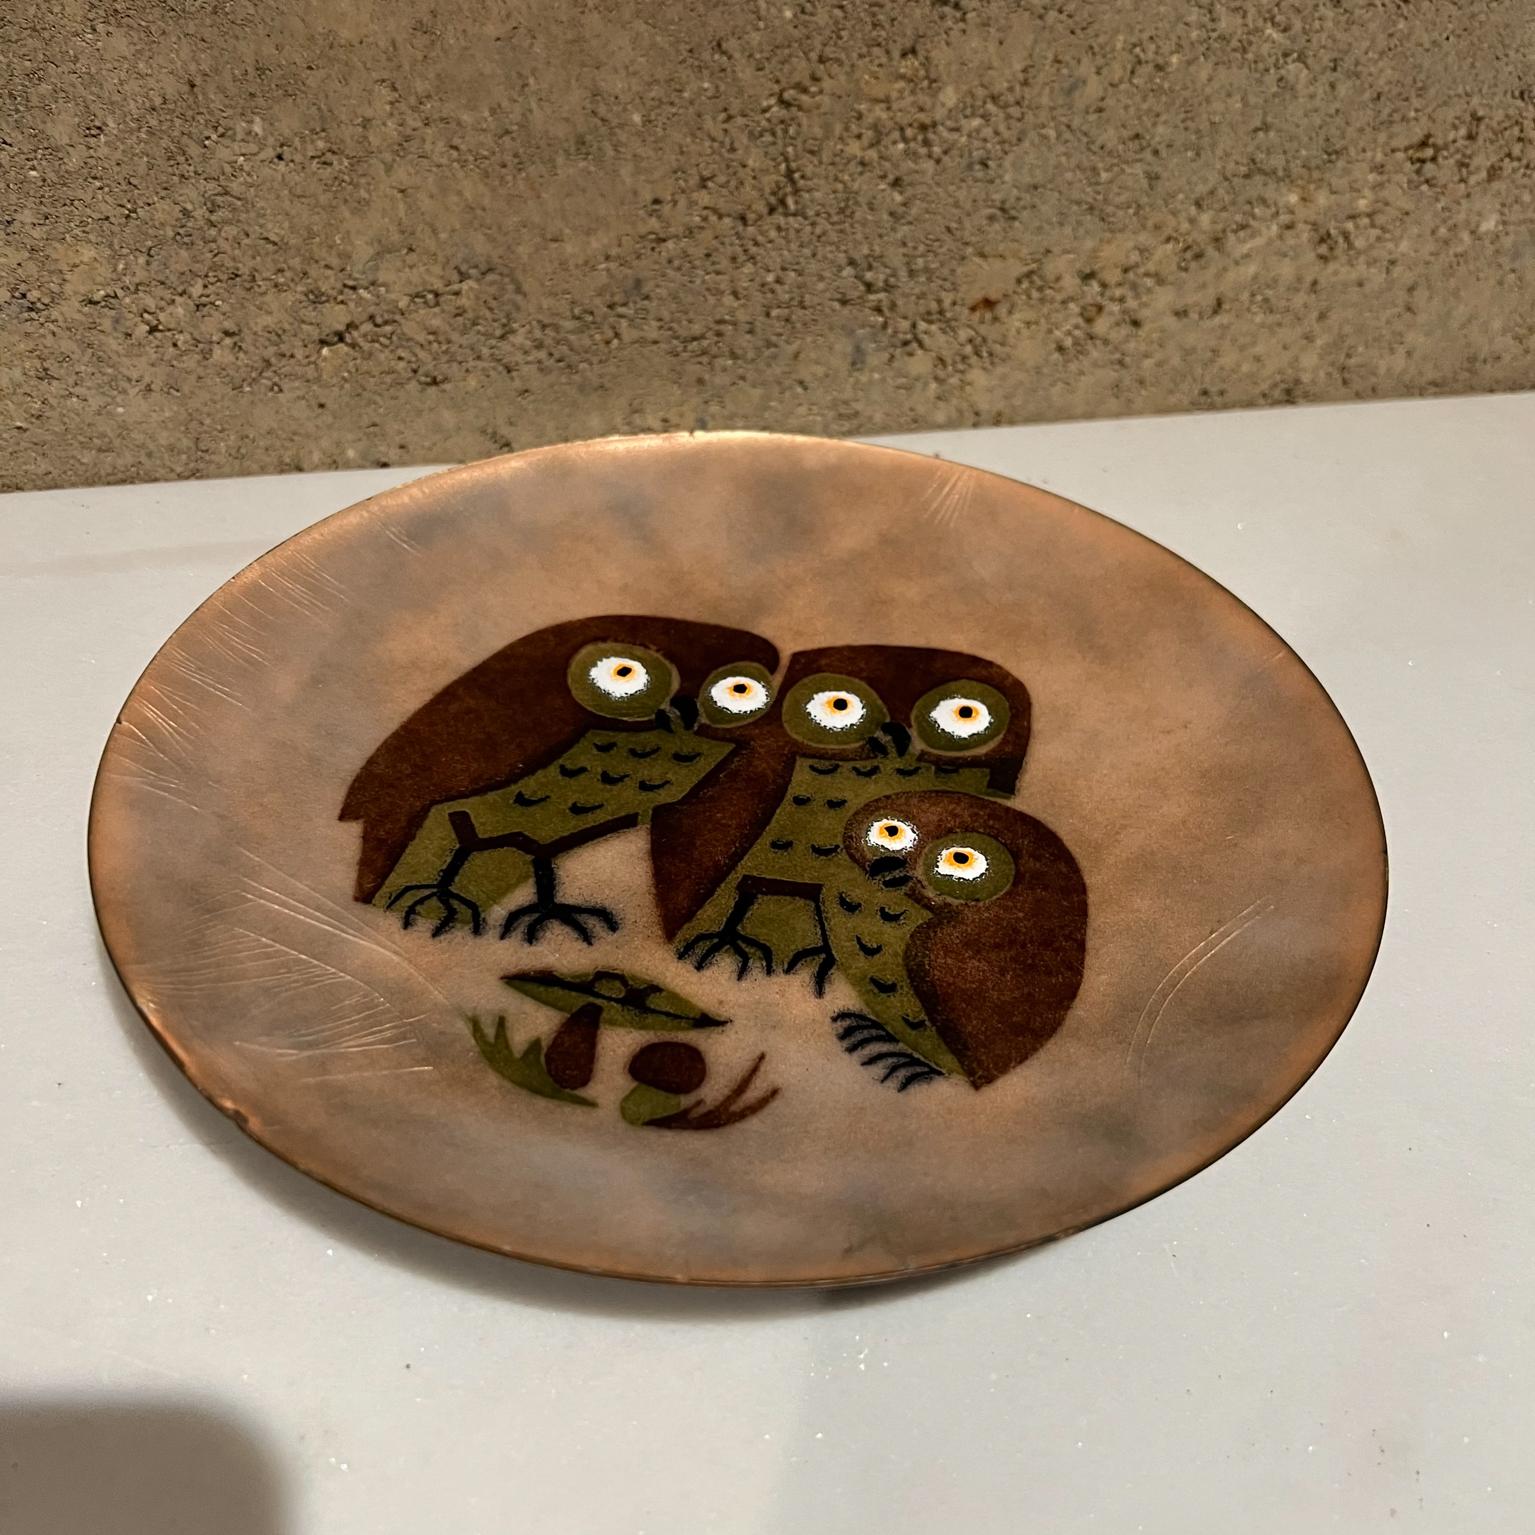 1960s Hand Crafted Enamel OWL Plate by Annemarie Davidson Sierra Madre, Calif 5